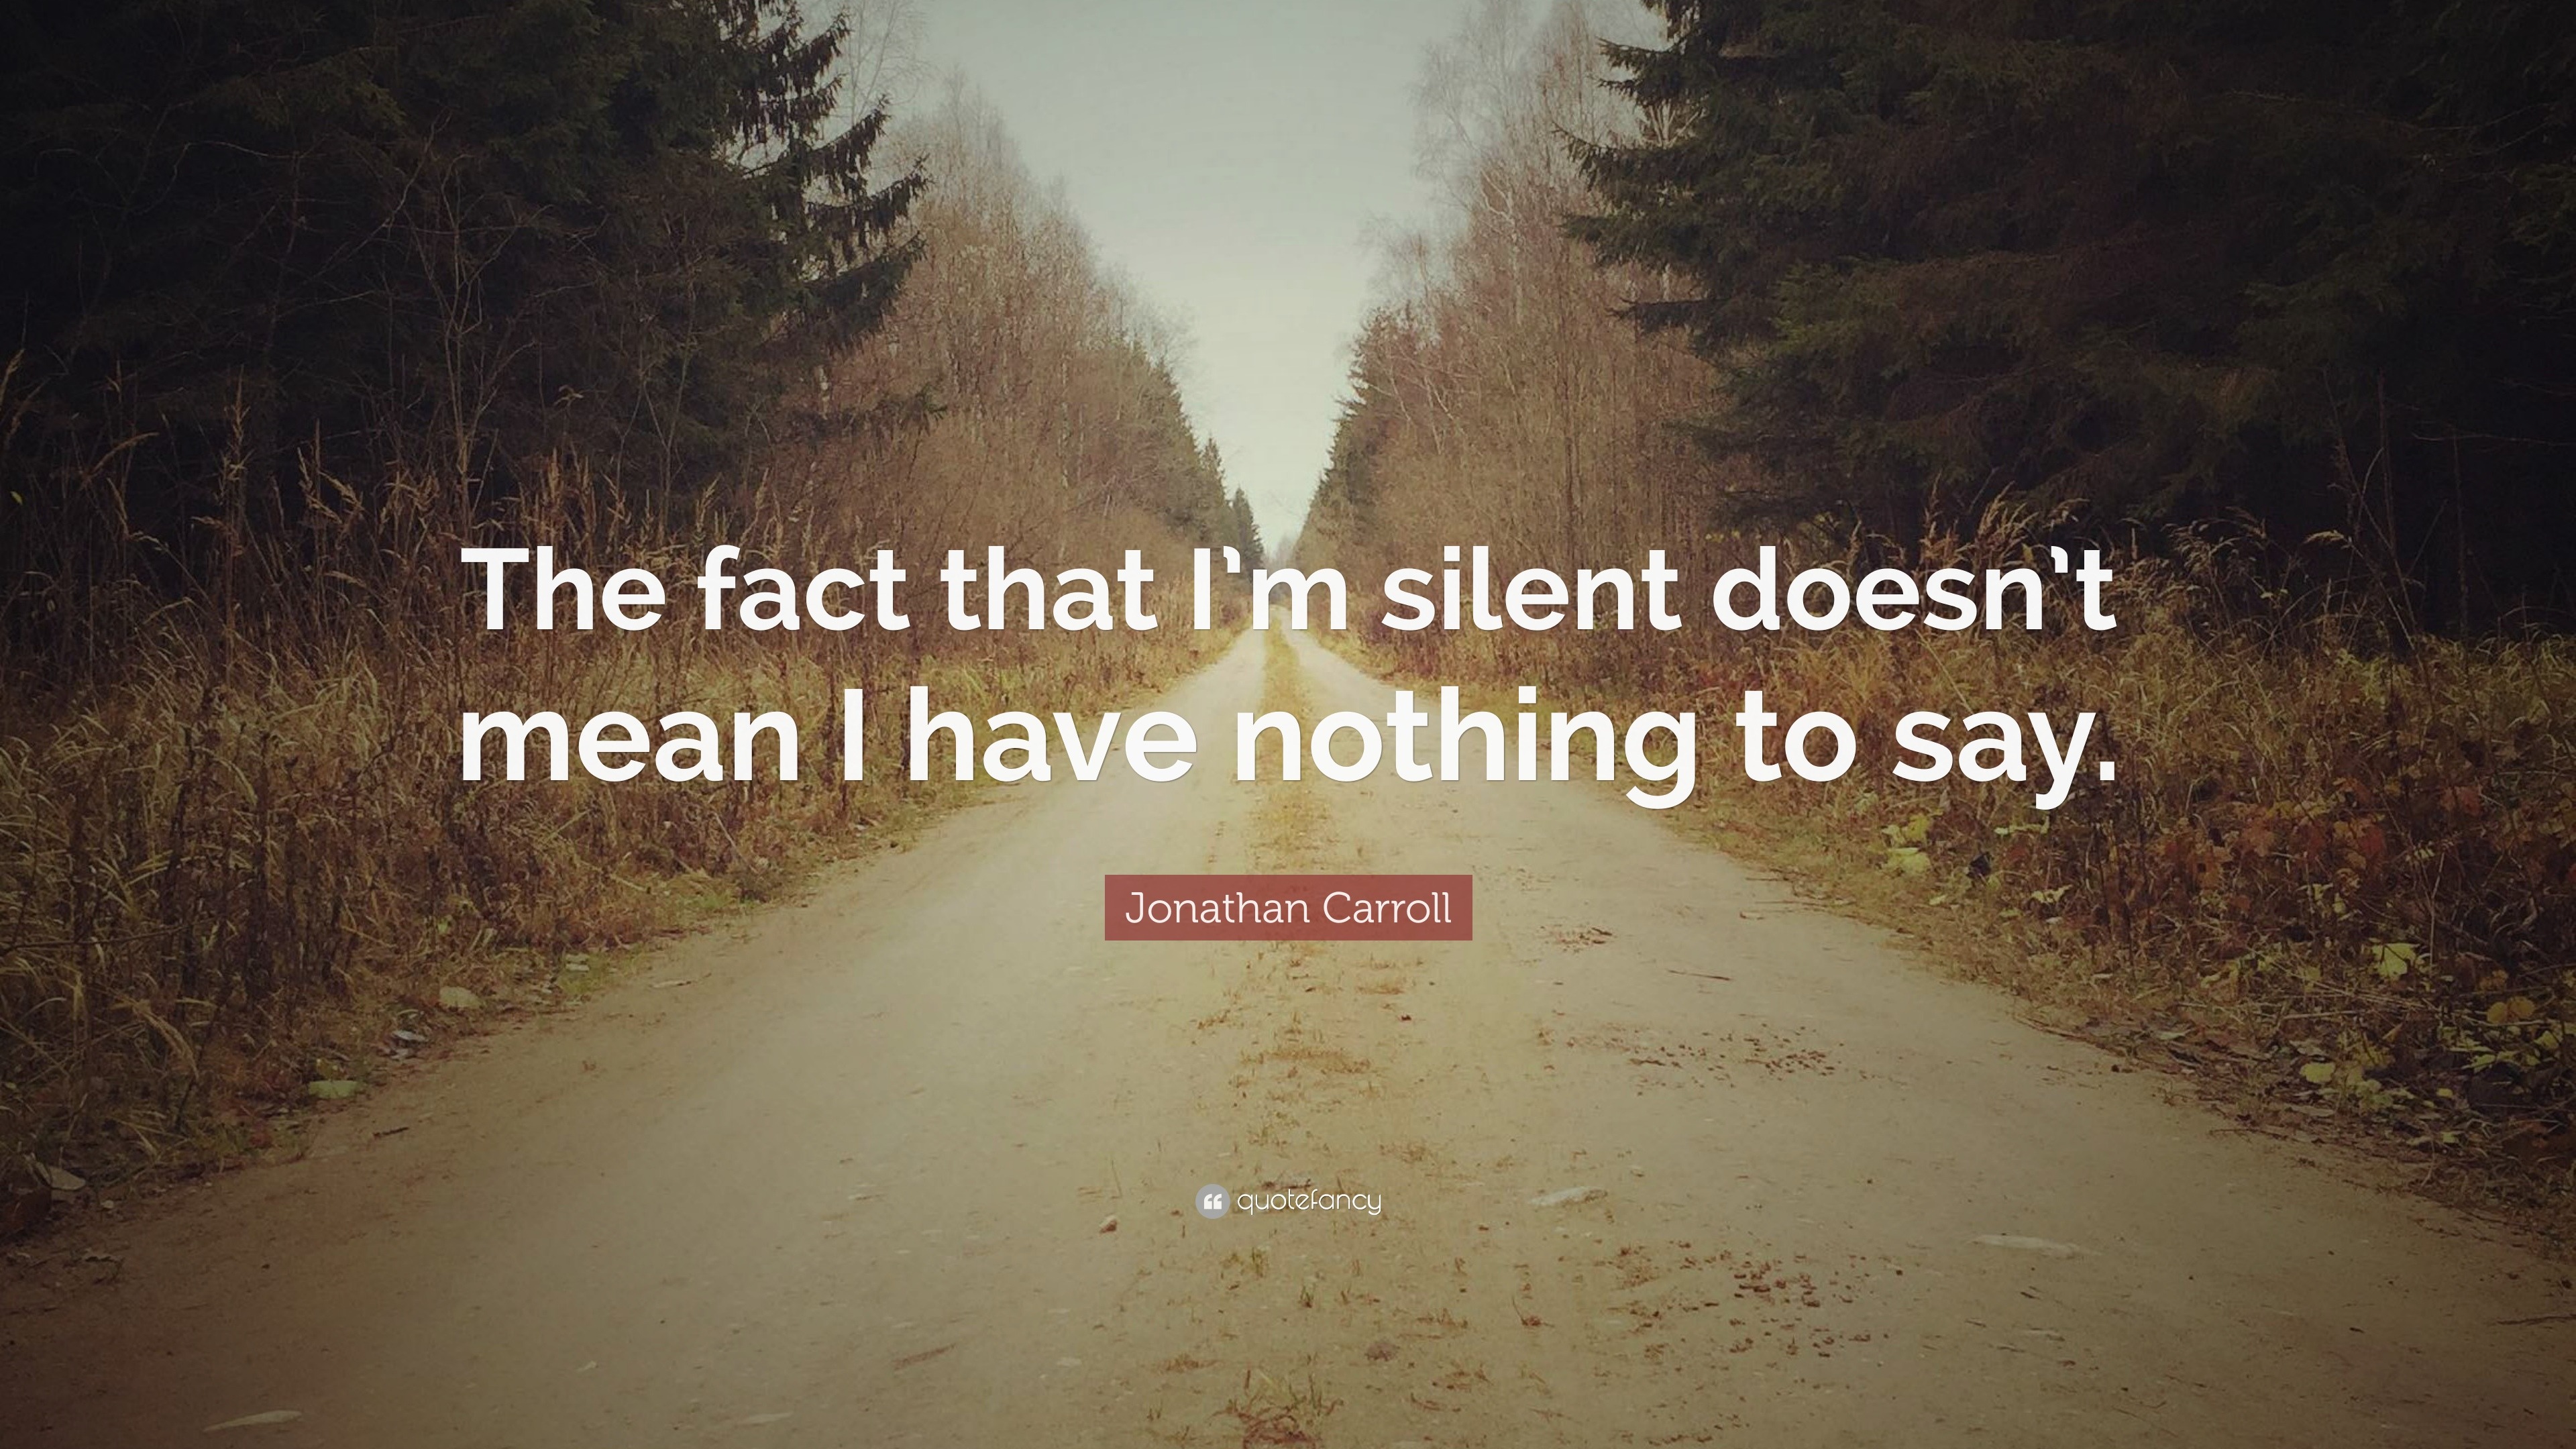 Negativna uverenja fotka 1- Jonathan Carroll Quote: “The fact that i am silent doesn't mean I have nothing to say'